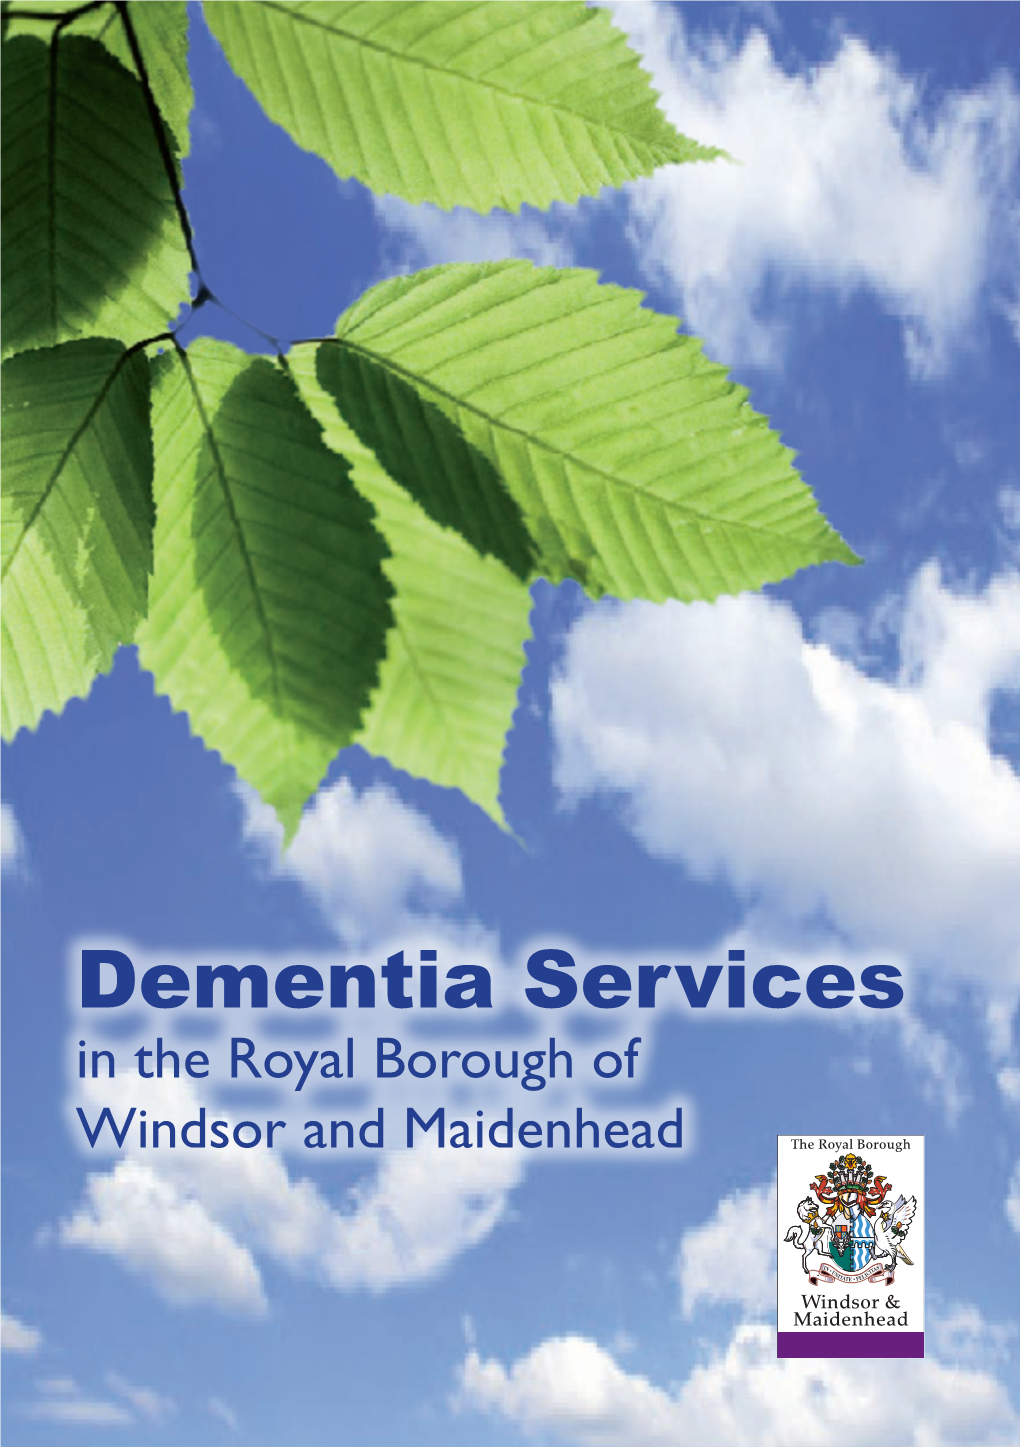 Dementia Services in the Royal Borough of Windsor and Maidenhead Introduction